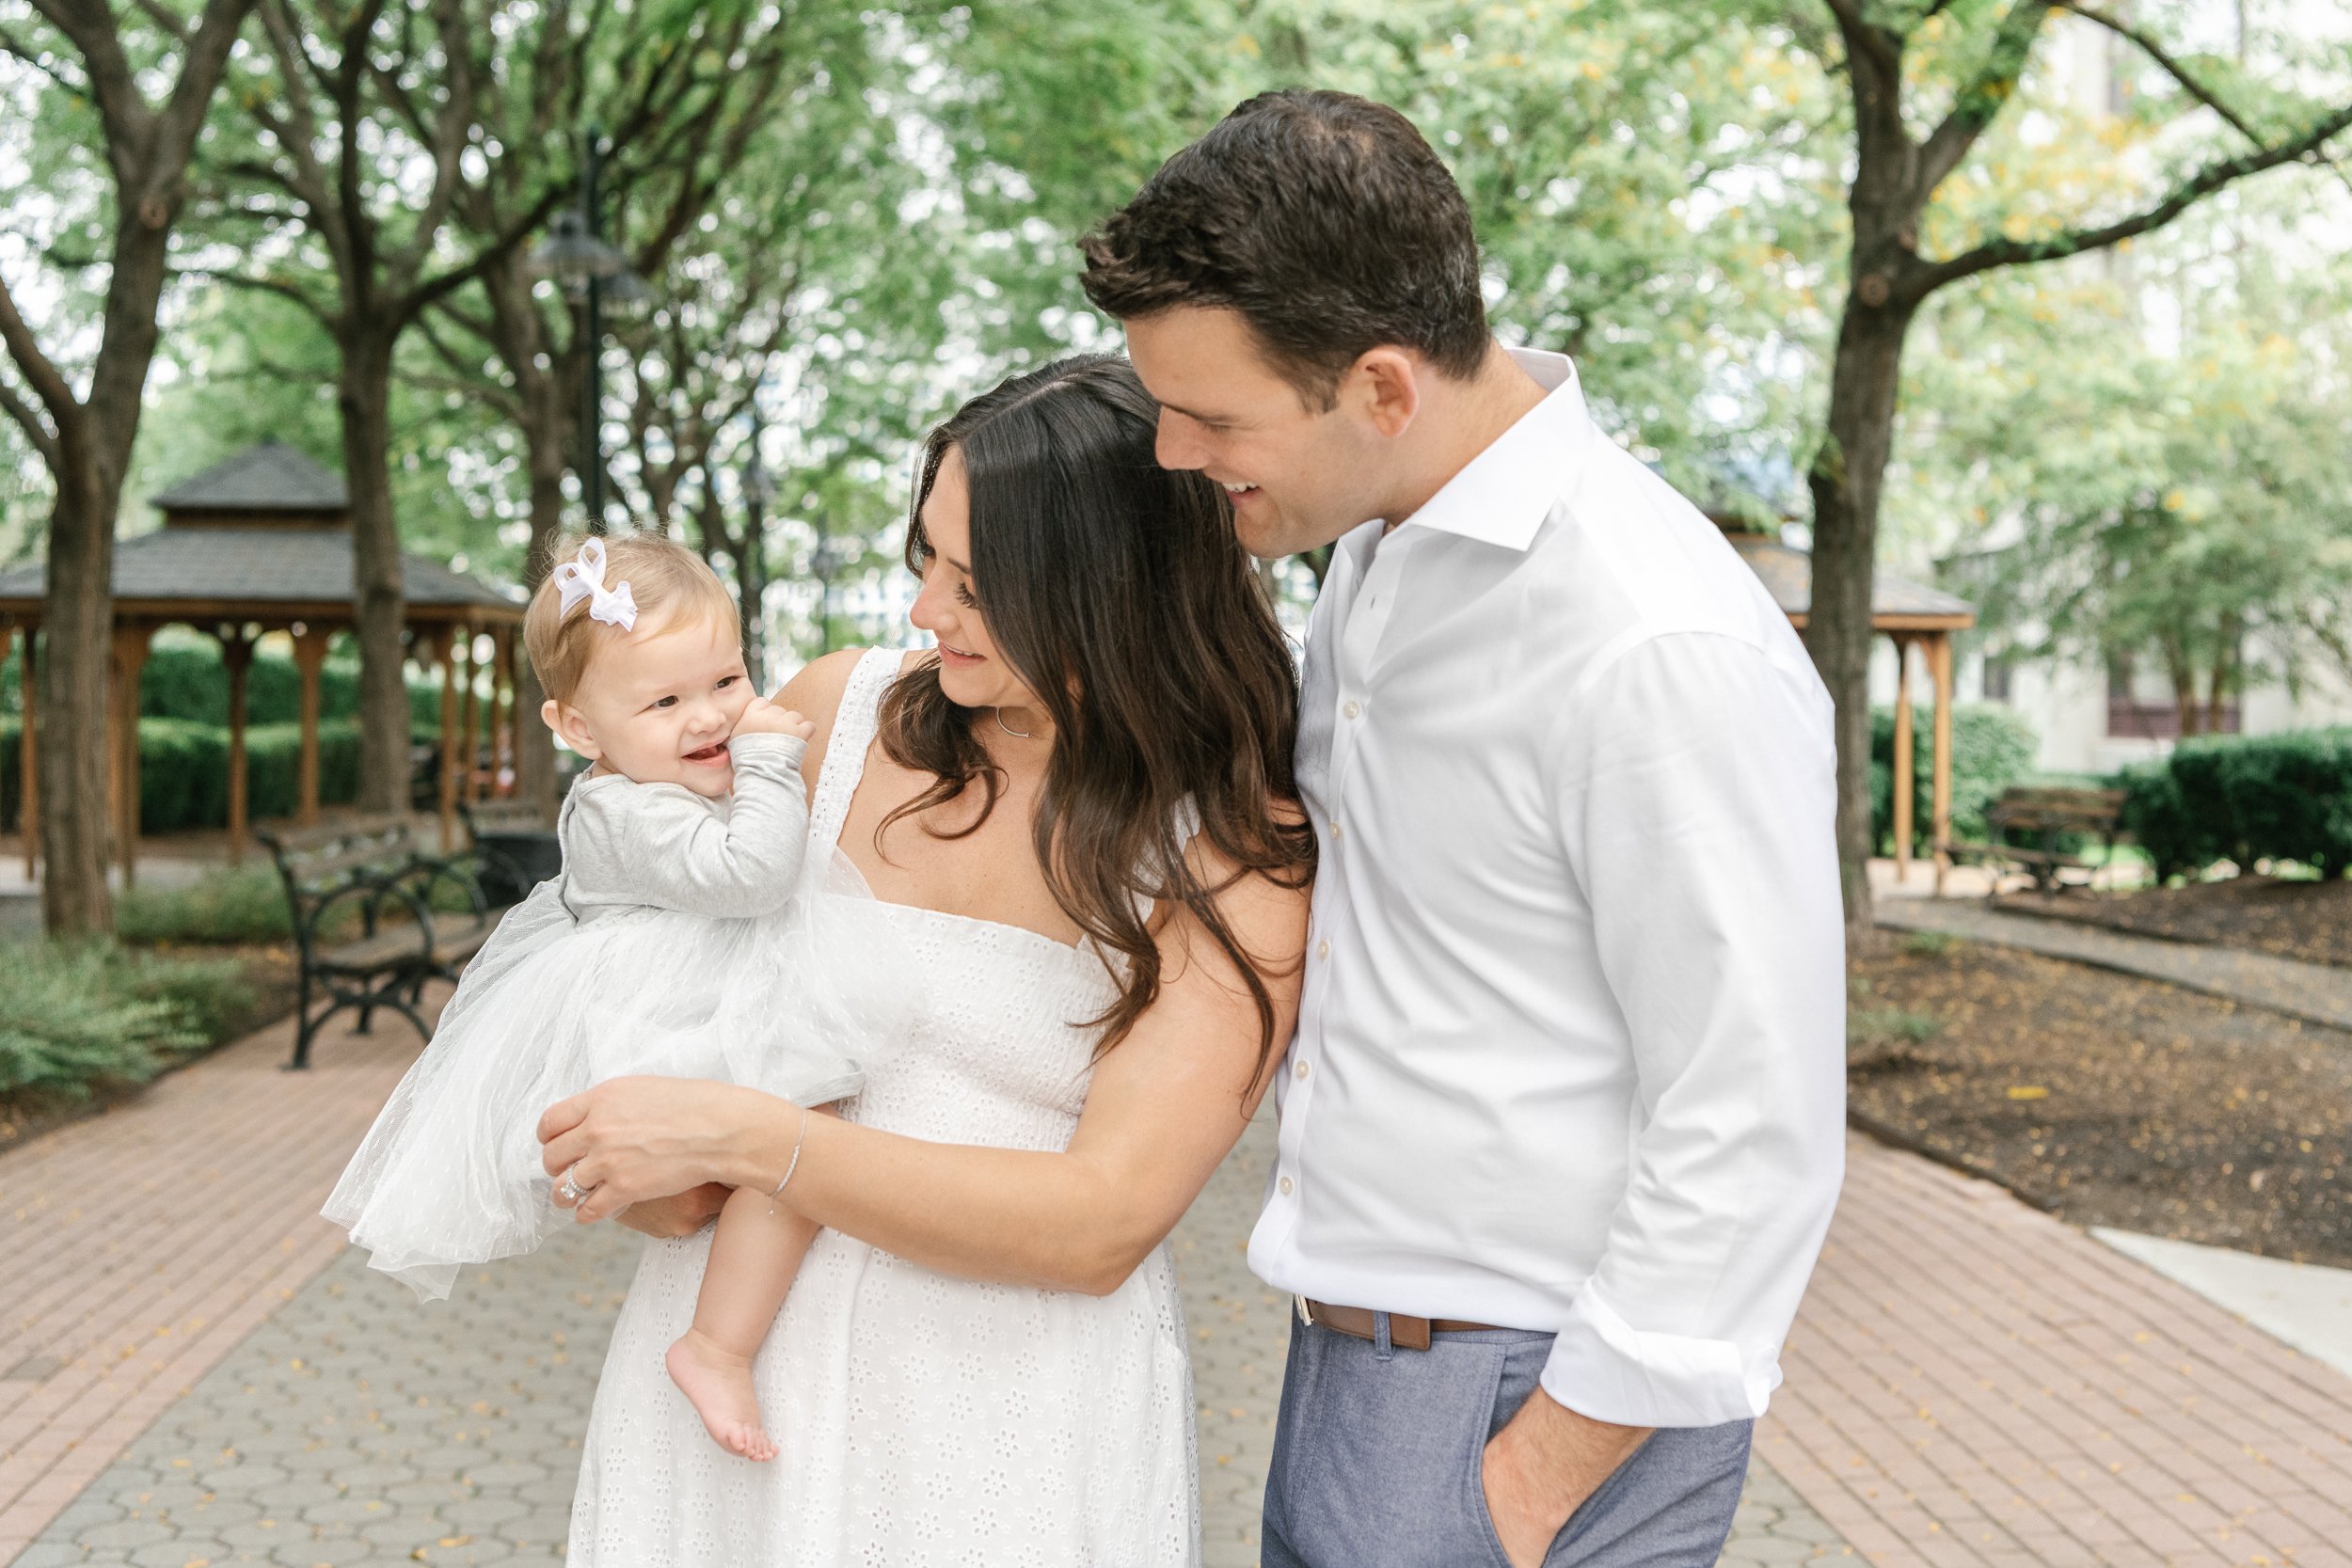  Mother and father look lovingly at their infant daughter in a white dress by Nicole Hawkins Photography. white dress family poses #nicolehawkinsphotography #newjerseyphotographers #familyphotographer #6monthportraits #NJfamilyphotos 